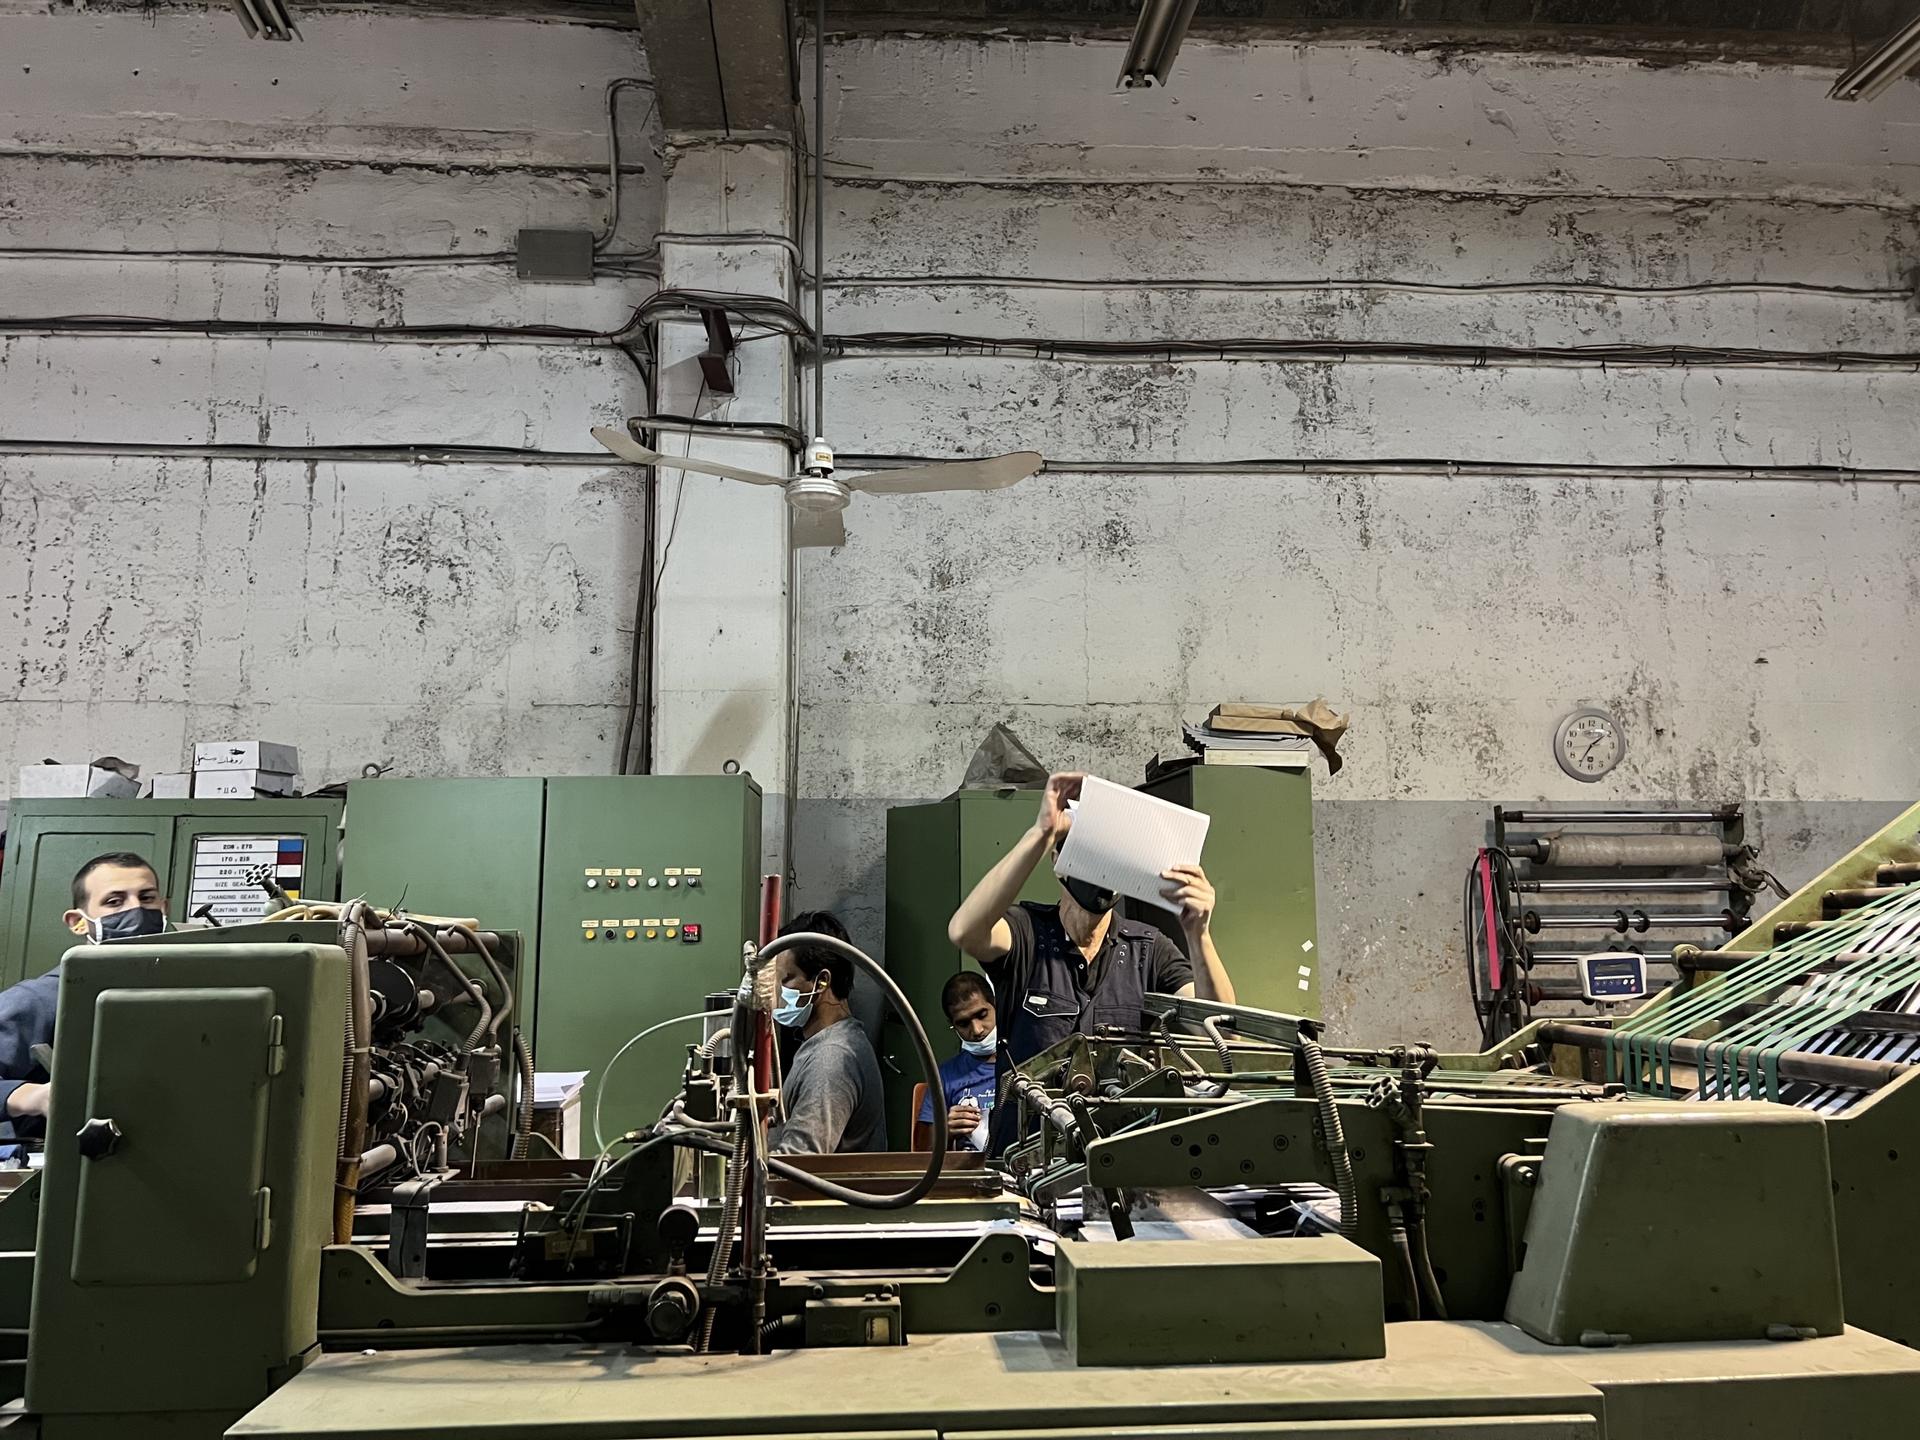 The Oriental Paper Products factory on the outskirts of Beirut employs 70 people. Its management is considering moving operations abroad, which means workers could lose their jobs.